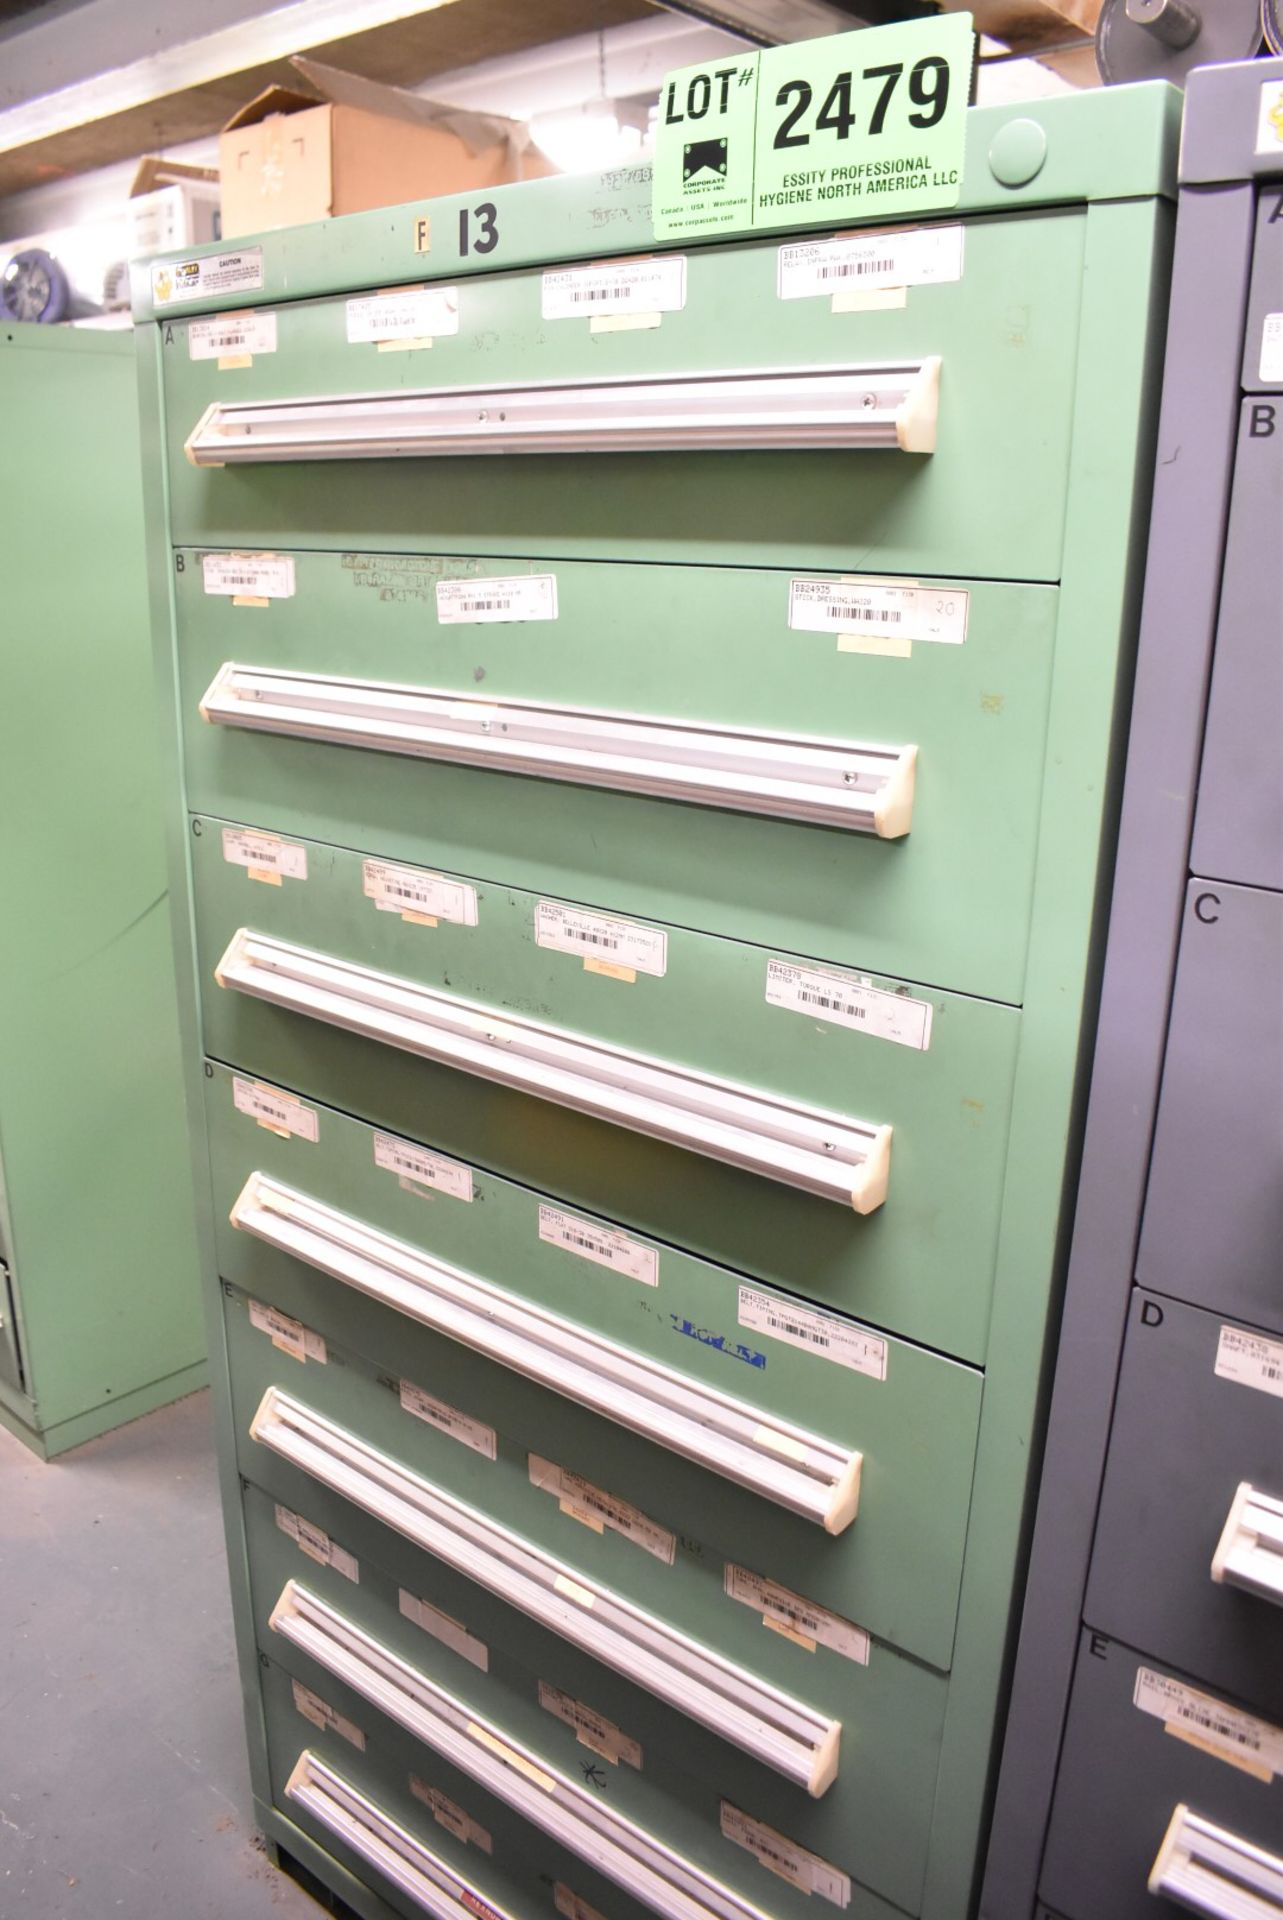 STANLEY VIDMAR 7-DRAWER TOOL CABINET [RIGGING FEES FOR LOT #2479 - $100 USD PLUS APPLICABLE TAXES]